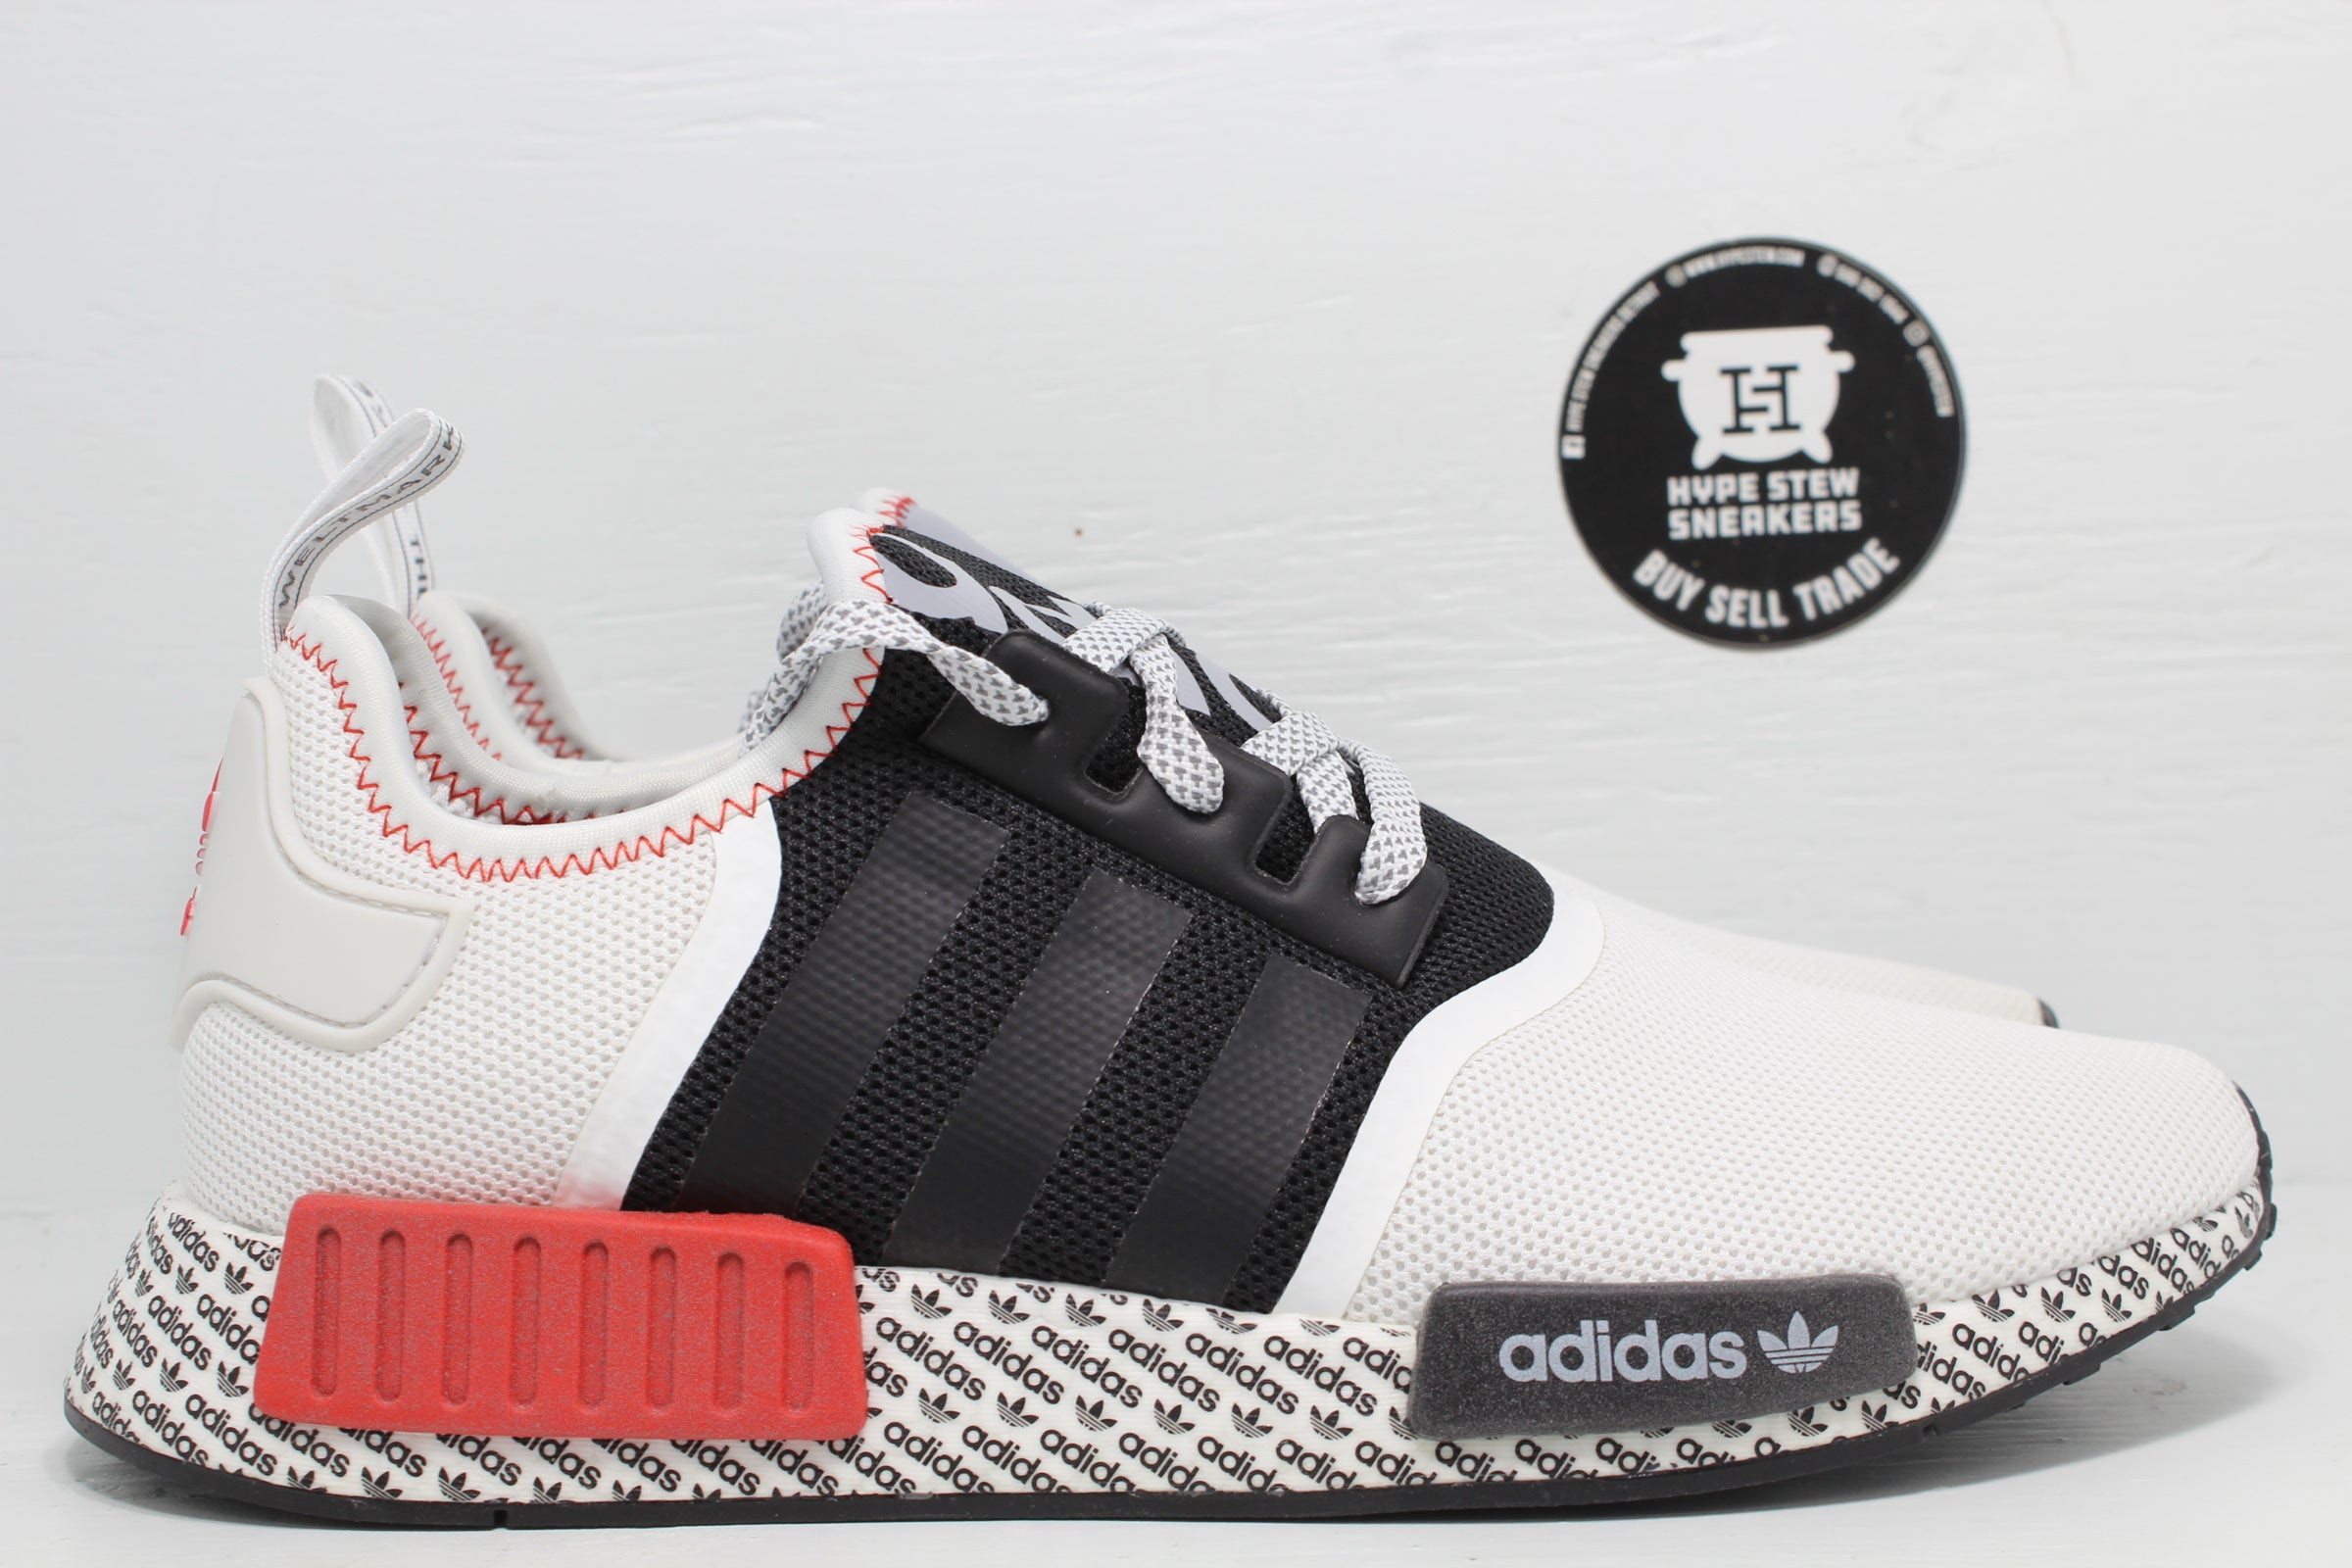 Adidas NMD Boost Print White Black Red | Hype Stew Sneakers Detroit